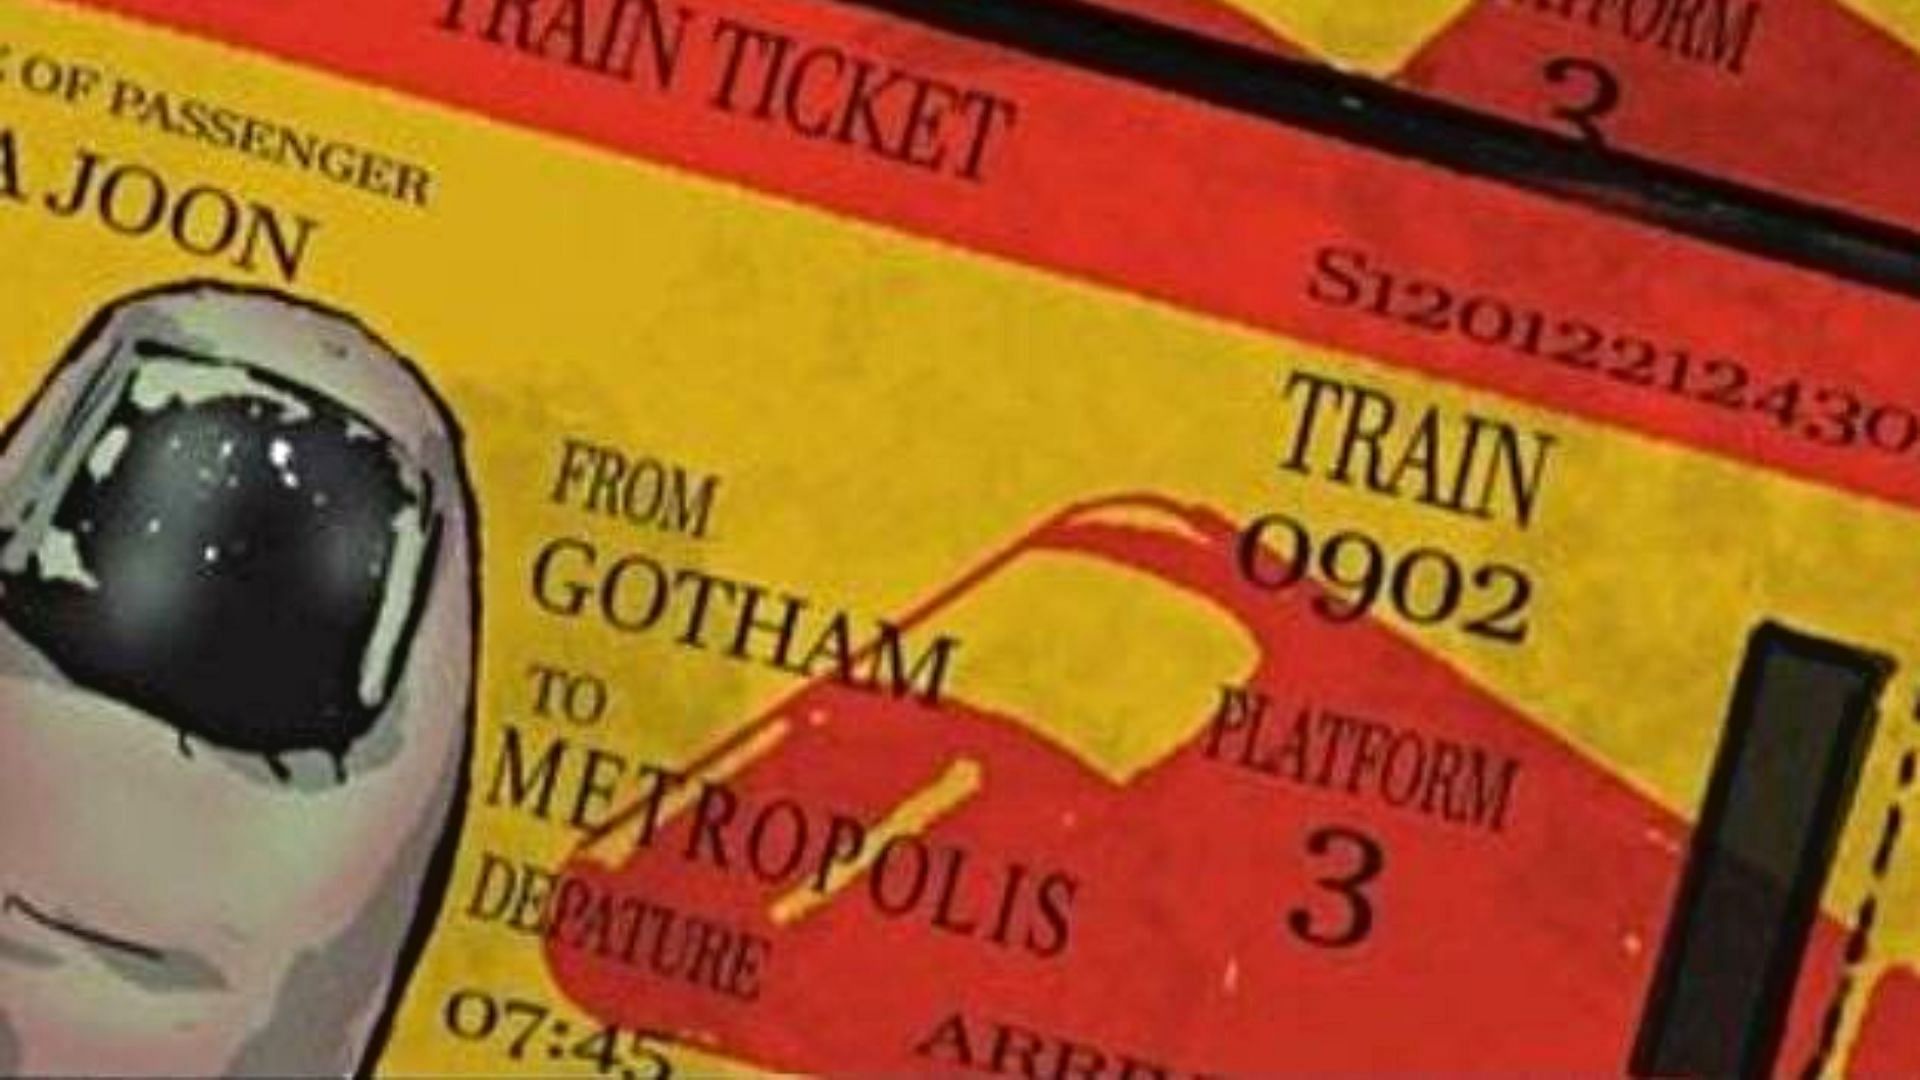 A panel from The Riddler: Year One shows the train ticket to Metropolis (Image credits: DC Comics)